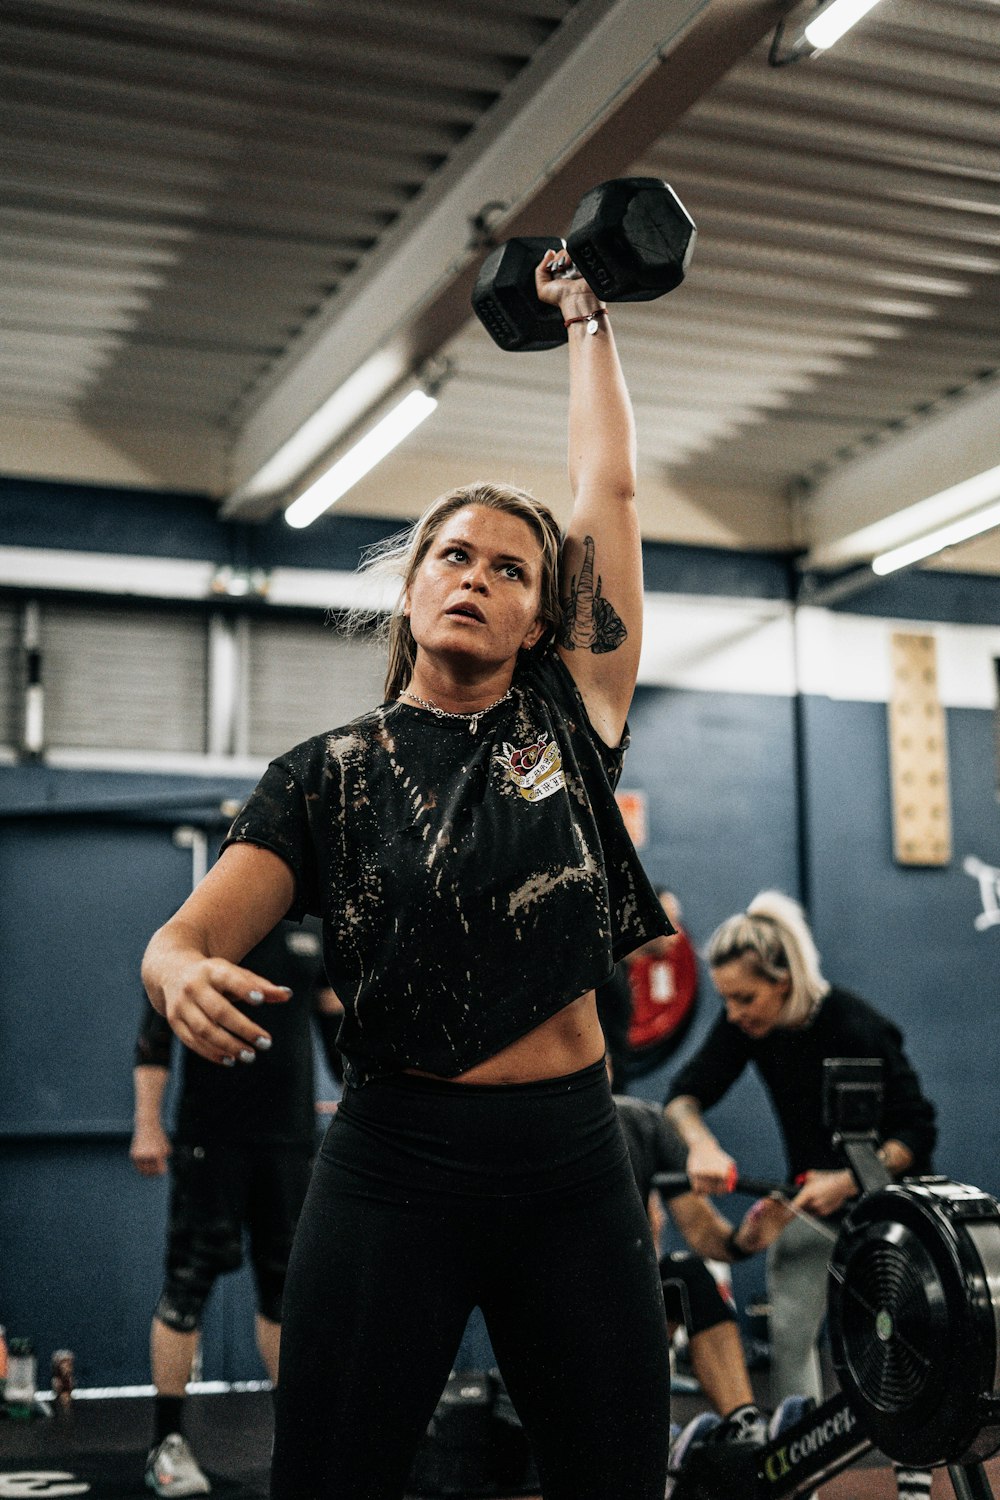 A woman holding a pair of dumbs in a gym photo – Strenght Image on Unsplash